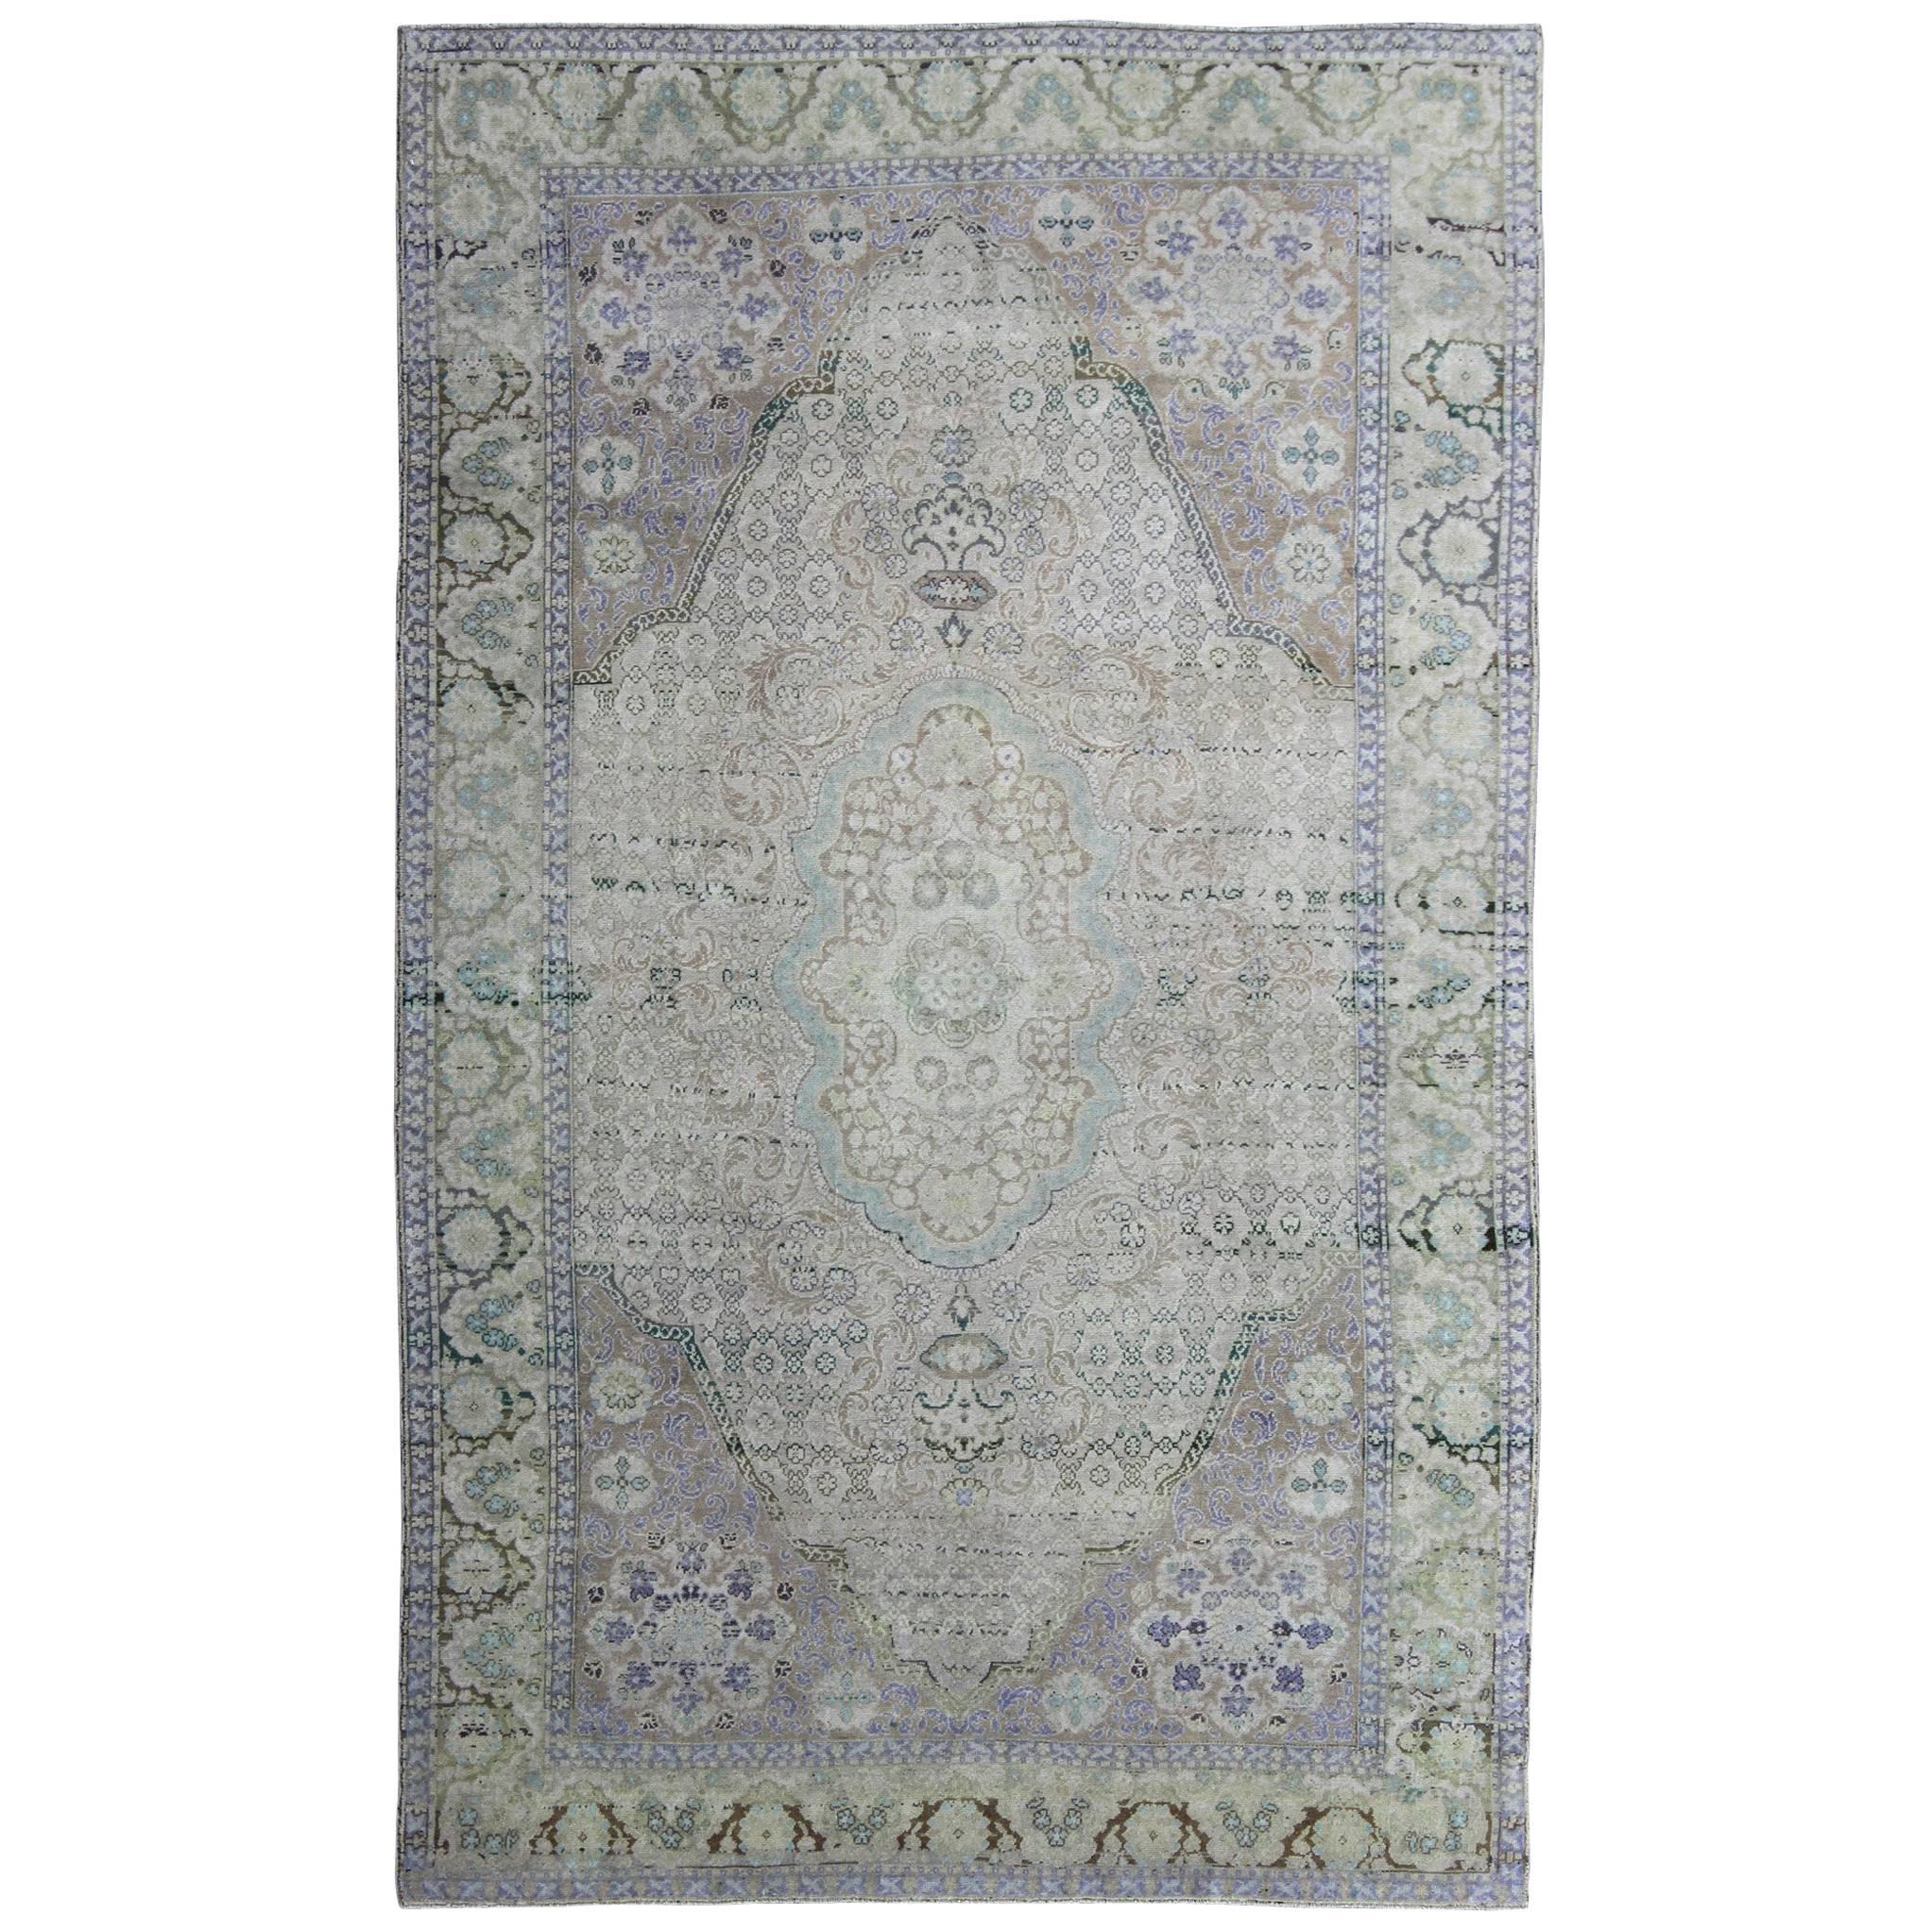 Vintage Turkish Rug with European Design in Various Shades of Lavender and Green